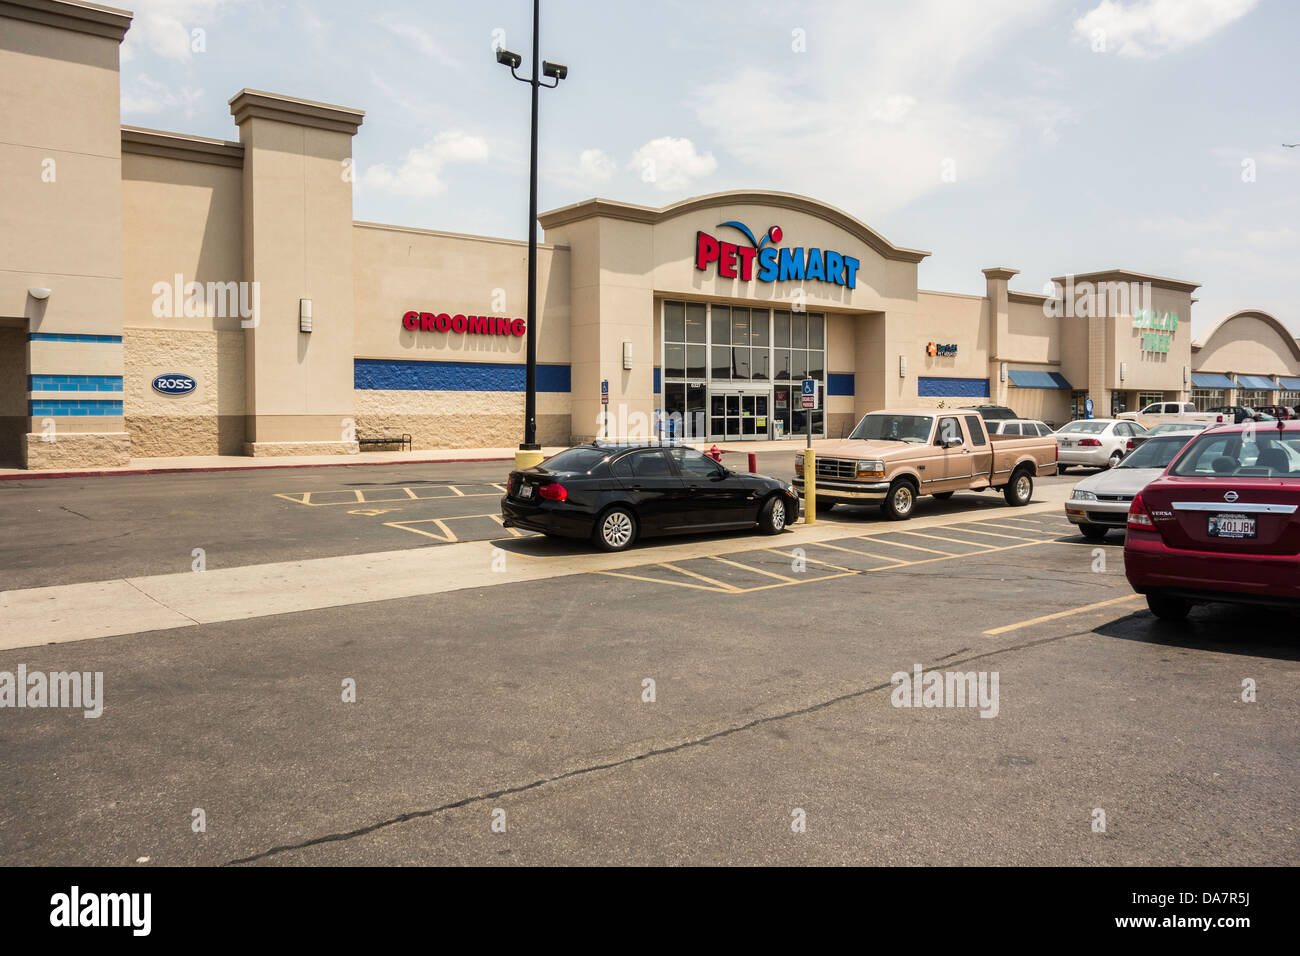 A PetSmart department store in a strip mall in Oklahoma City, Oklahoma, USA. Stock Photo